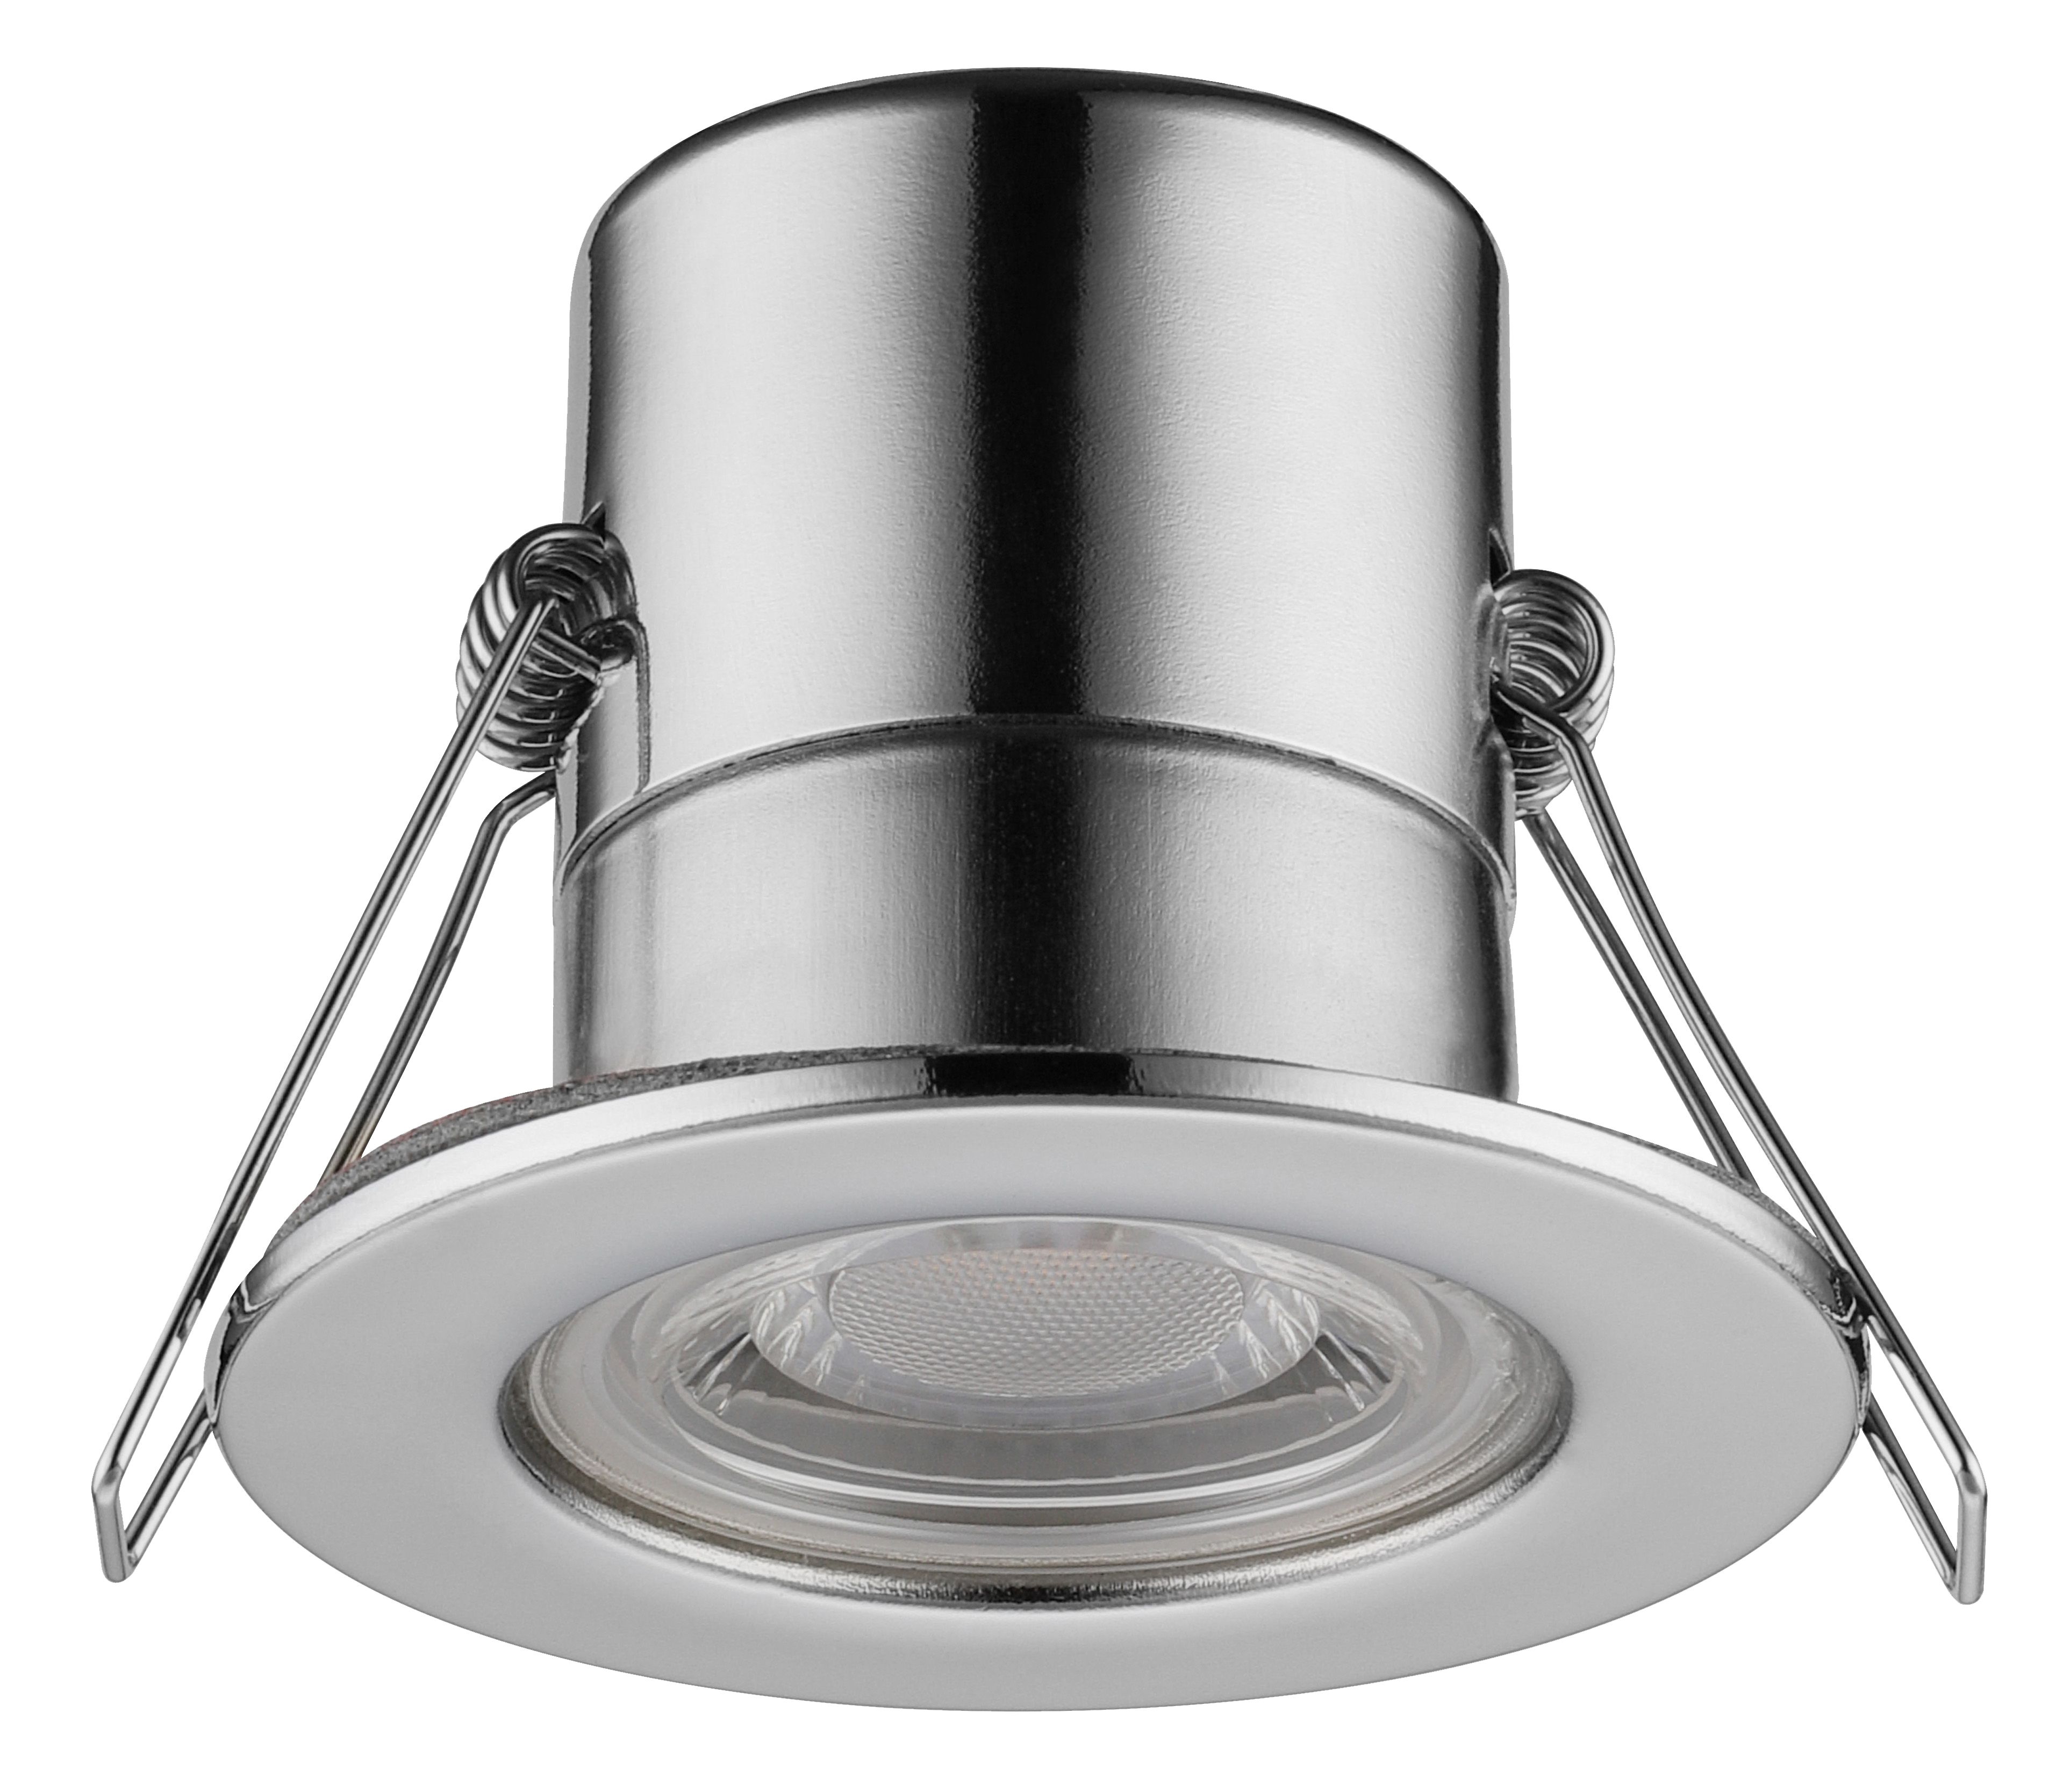 Luceco Eco Silver Chrome effect Fixed LED Fire-rated Cool white Downlight 5W IP65, Pack of 6